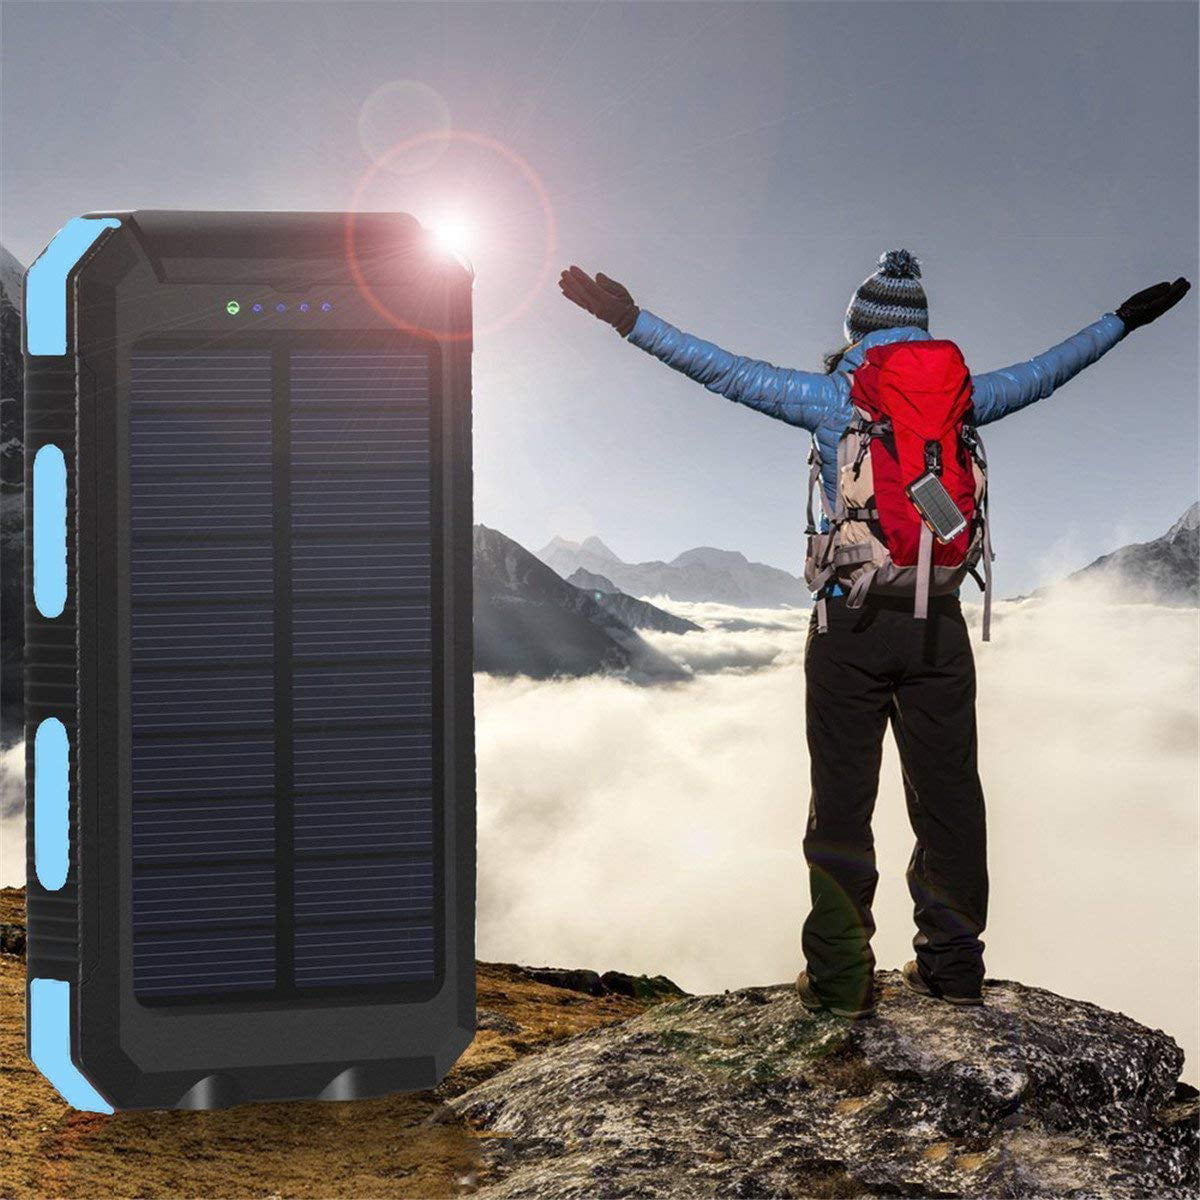 Tainbat Solar Power Bank 20000mAh Portable Charger Solar for Cell Phone Waterproof External Backup Battery USB Charger with Flashlight Compass for Emergency or Camping Hiking Outdoor 